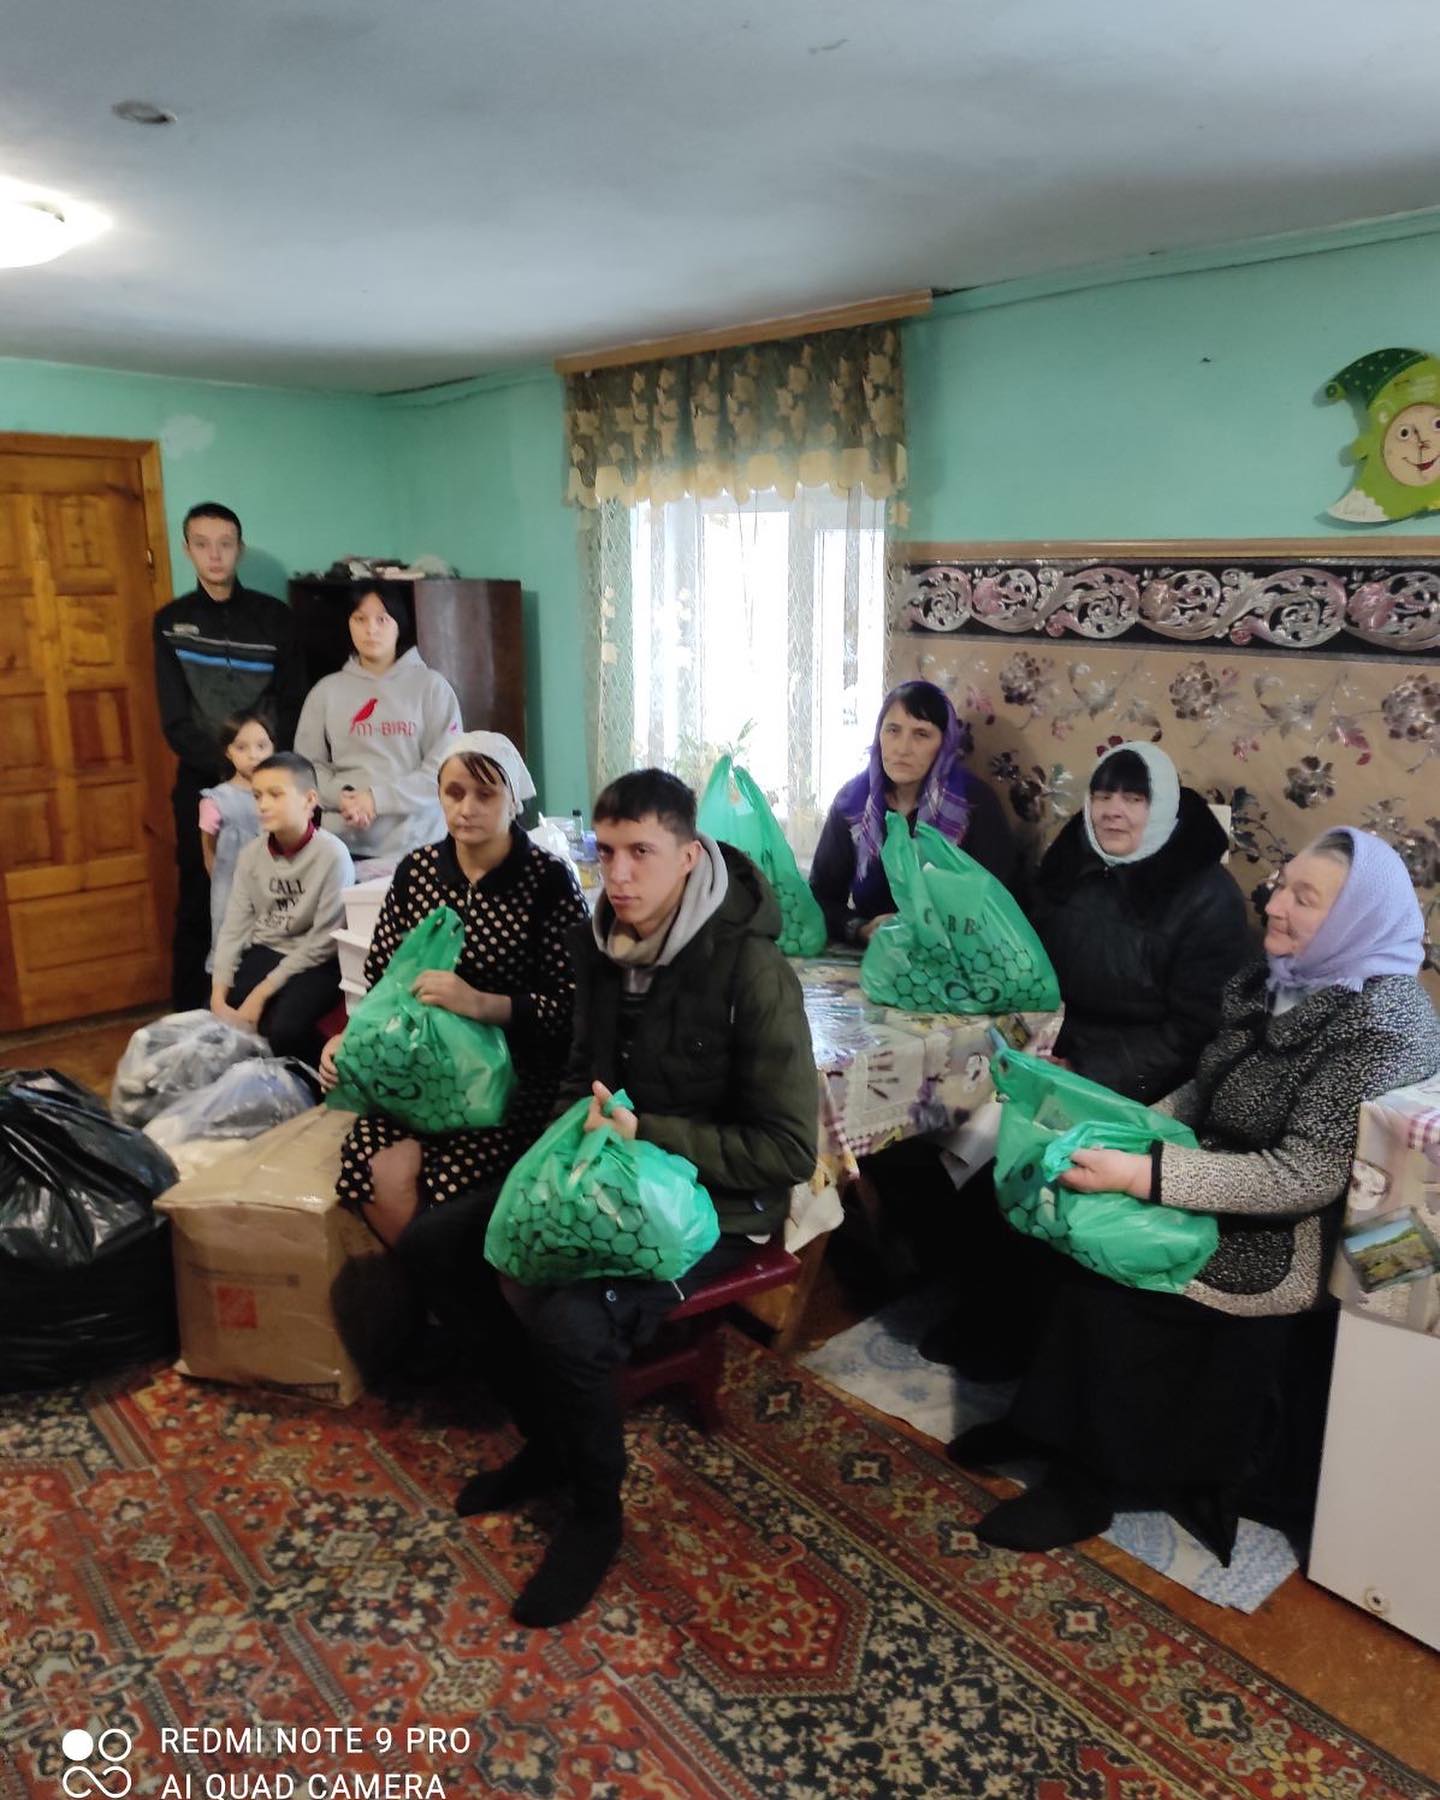 A group of people sitting in a room with green bags.